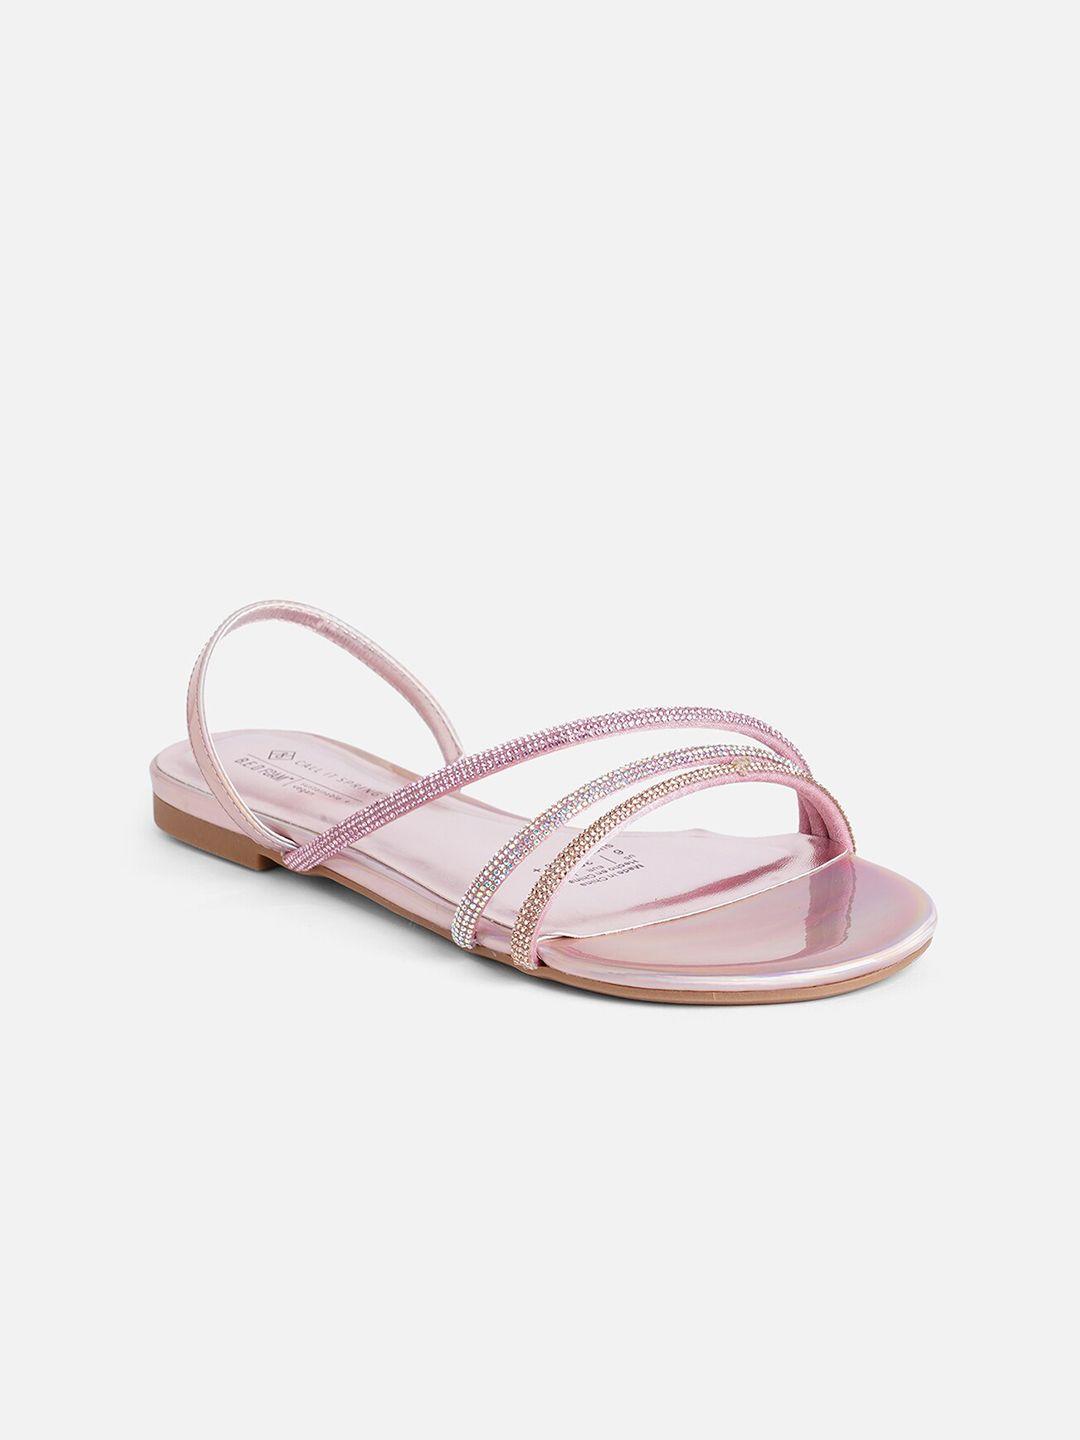 call it spring embellished strappy open toe flats